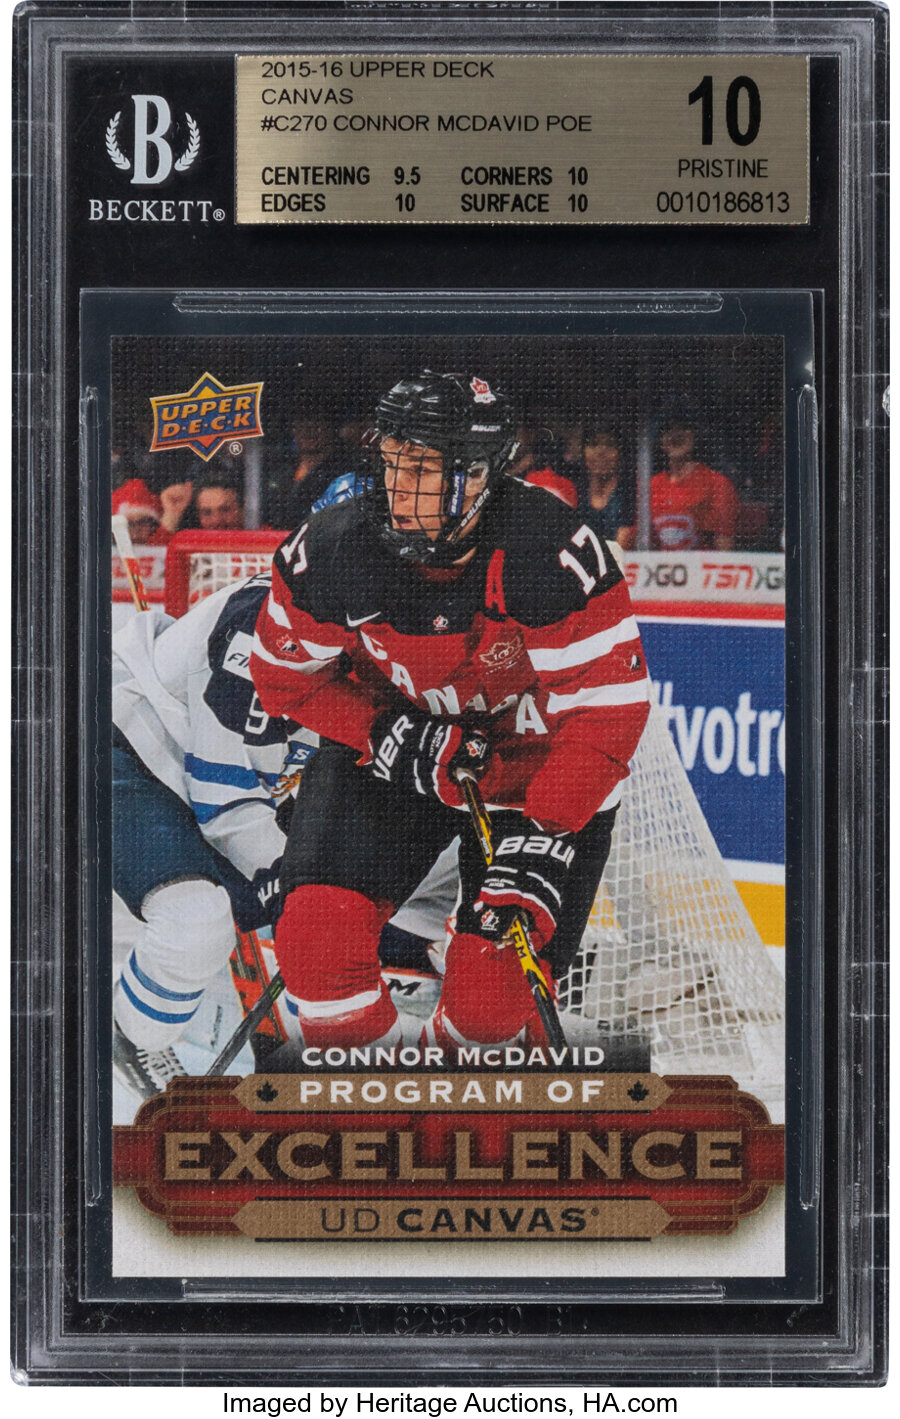 2015 Upper Deck Connor McDavid (UD Canvas-Program of Excellence) Rookie #C270 BGS Pristine 10